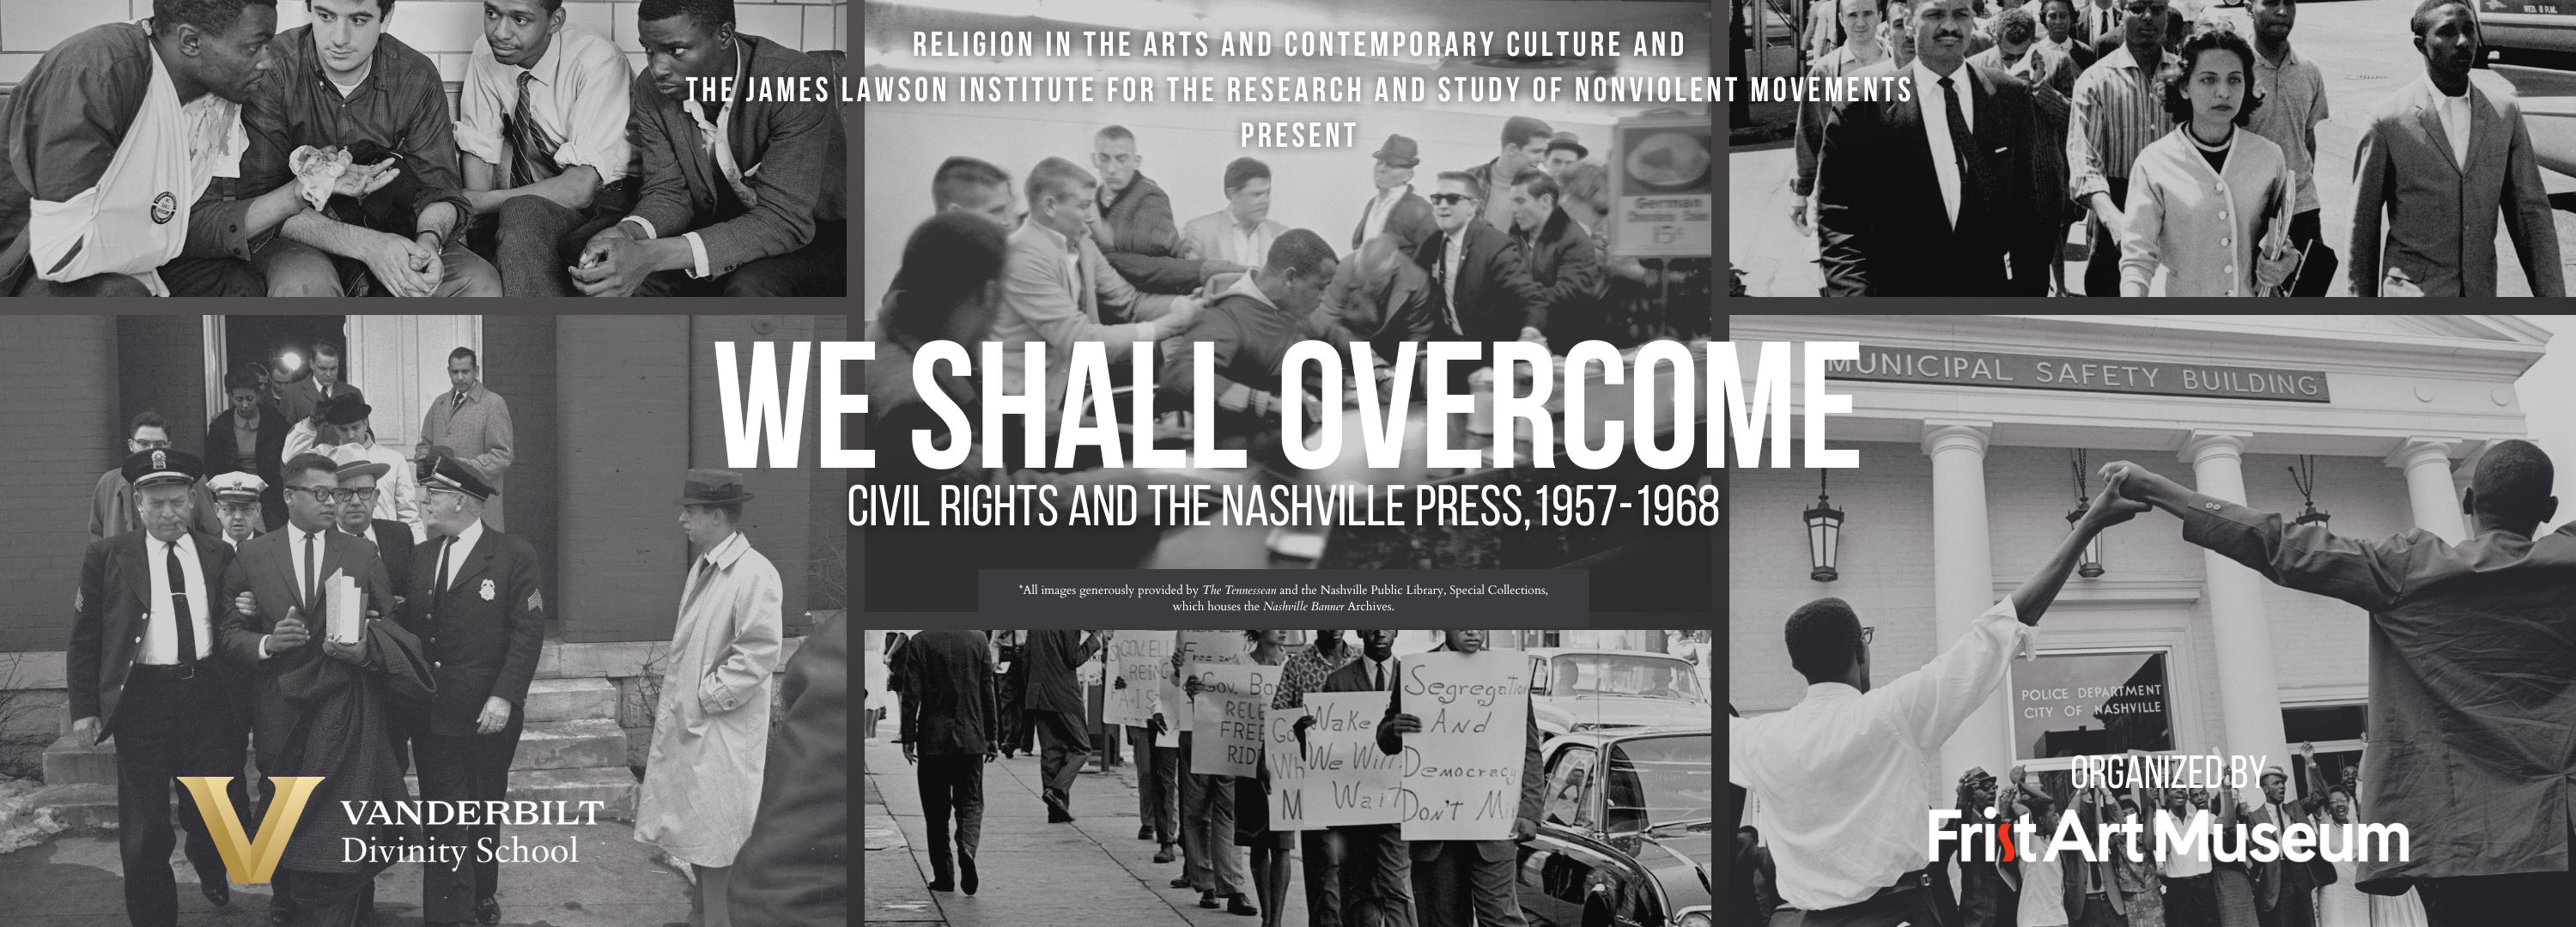 We Shall Overcome: Civil Rights and the Nashville Press, 1957-1968